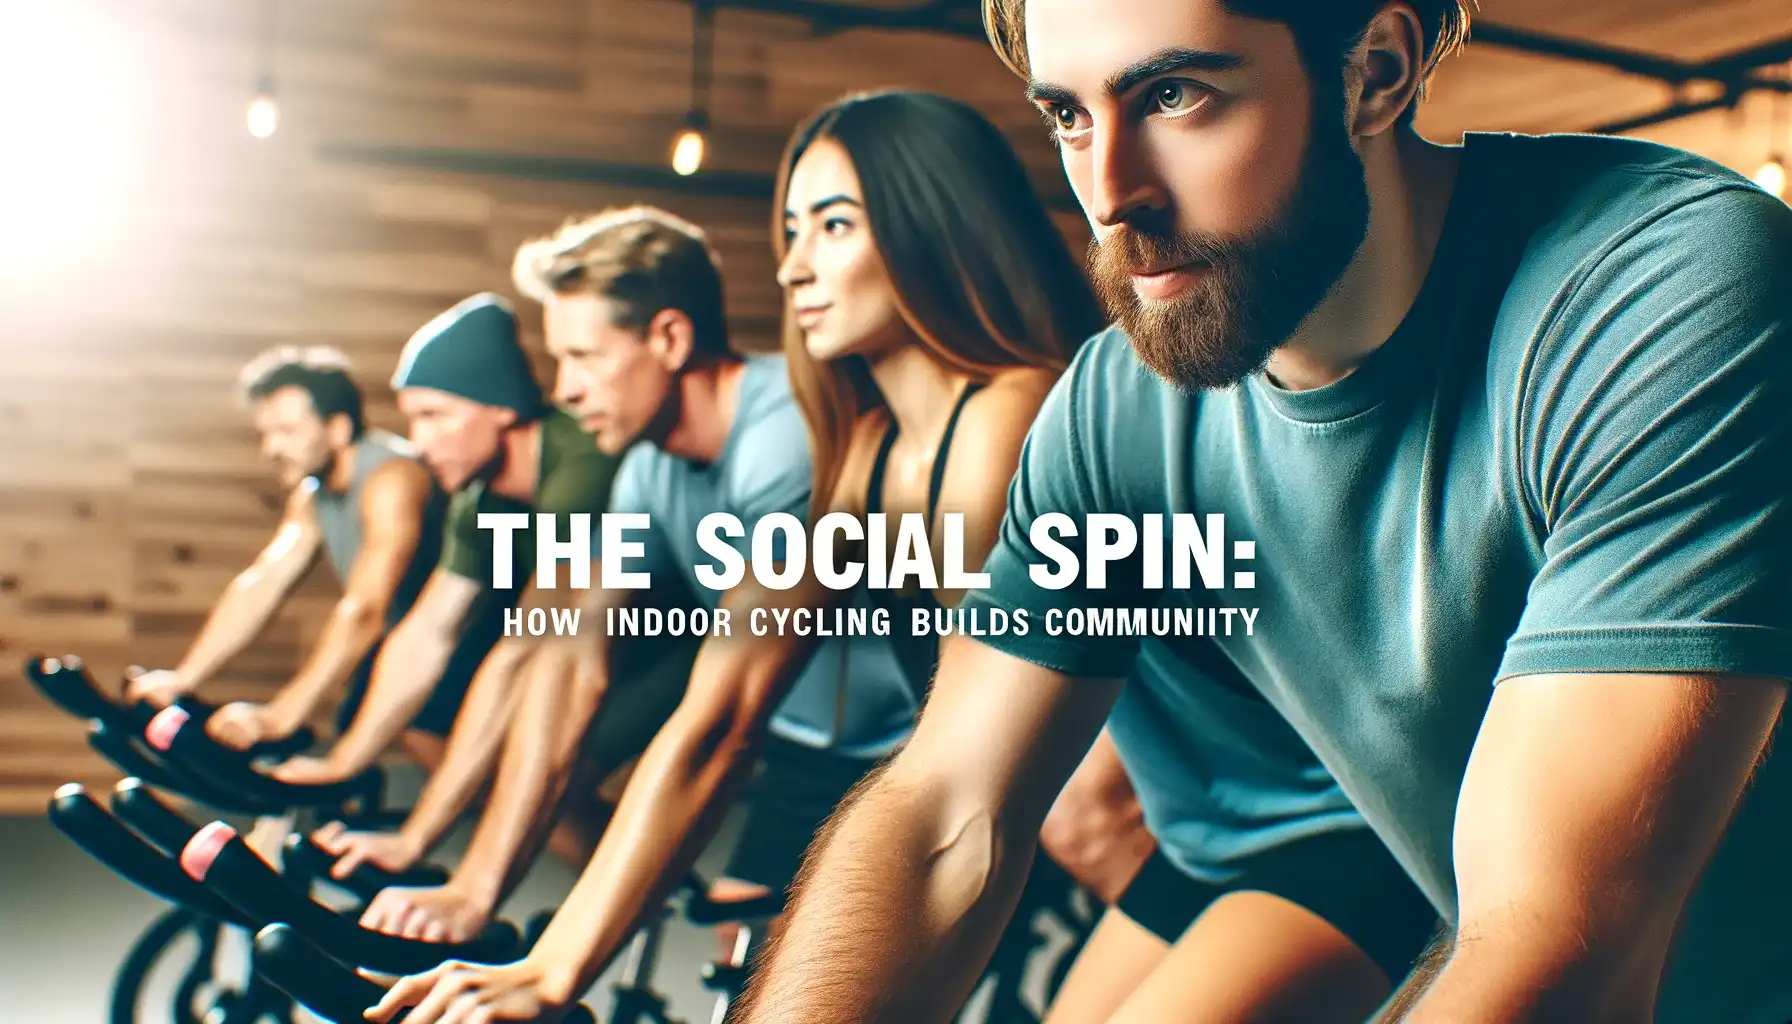 The Social Spin: How Indoor Cycling Builds Community